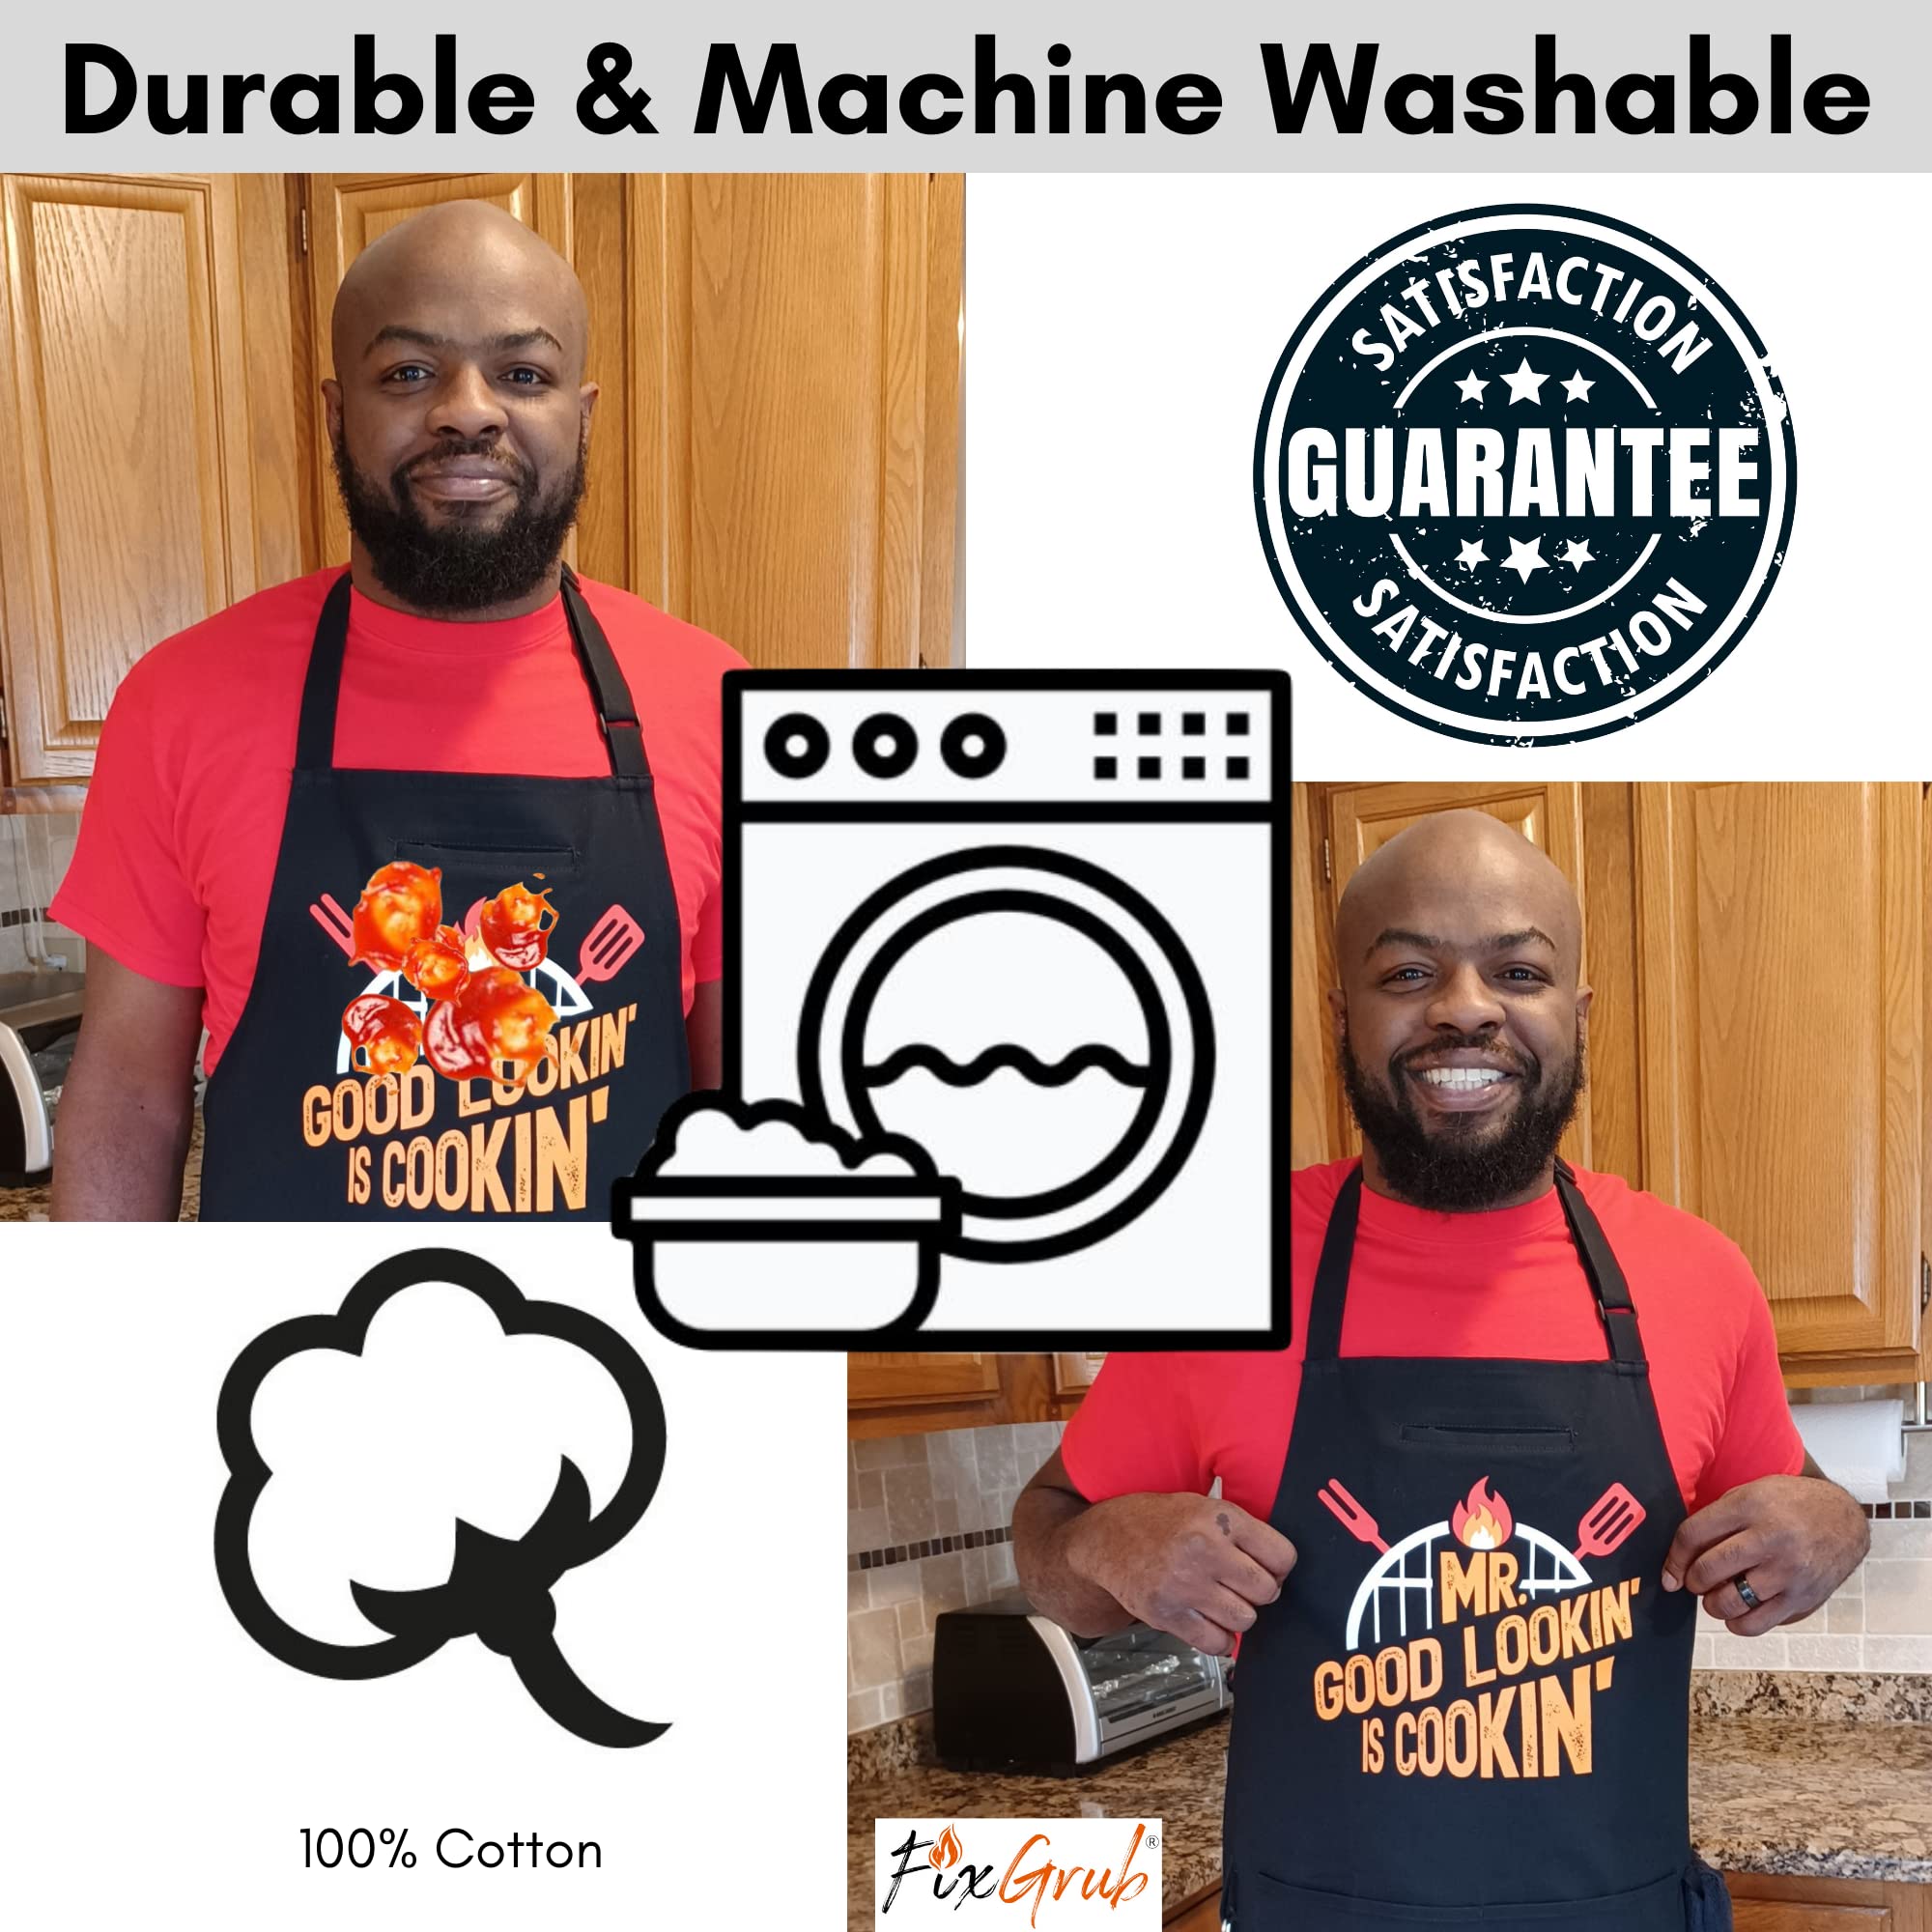 FixGrub Mr Good Lookin is Cookin BBQ Apron, Cooking Apron, Dad Apron, Funny Black Kitchen Apron with 3 Pockets,100% Cotton Durable